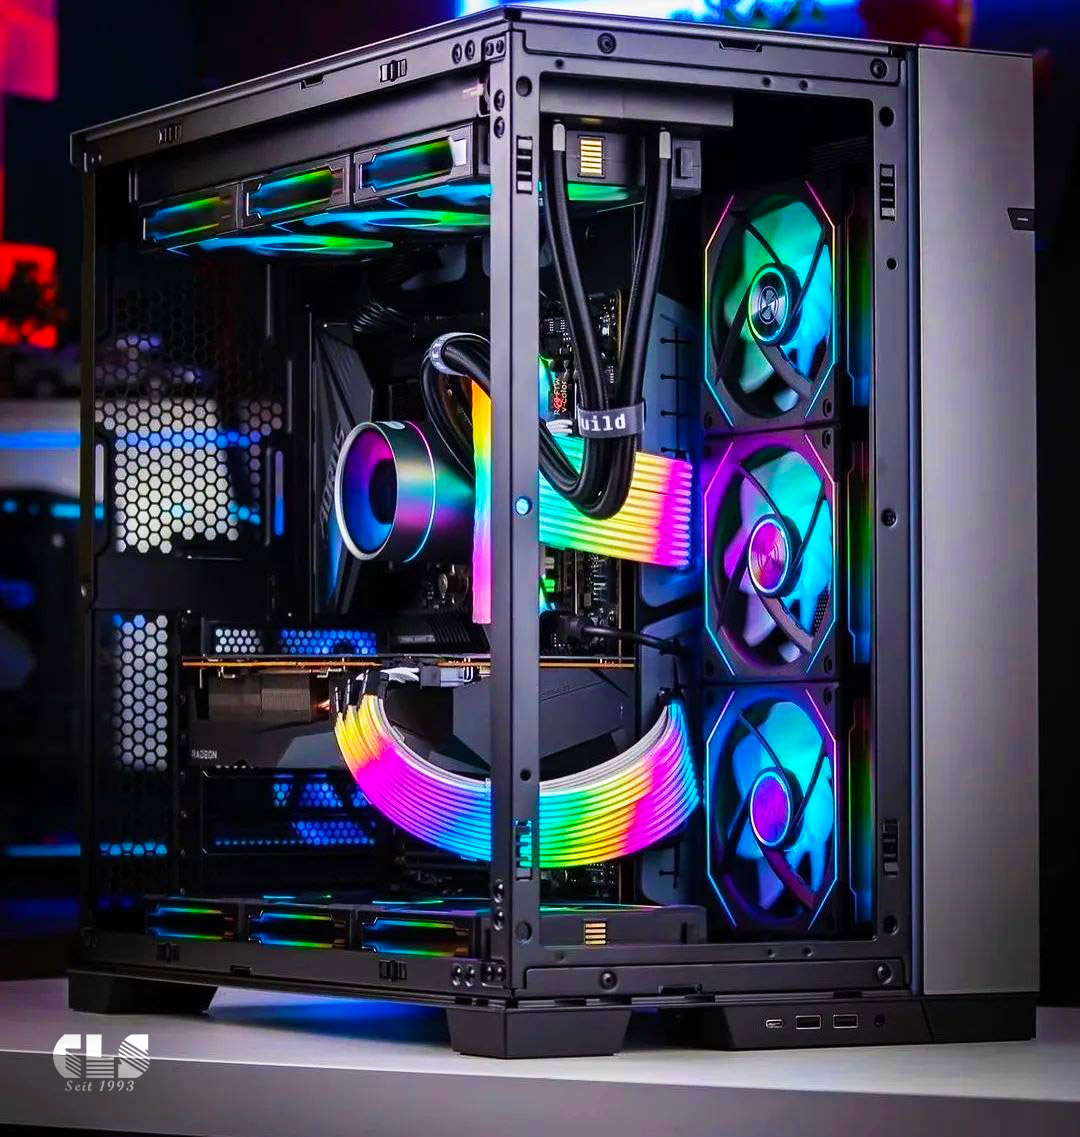 Ultra gaming pc build with amazing cables by #clscomputer
Grab your now at: cls-computer.de/pc-konfigurato…

#pcbuild #pcbuilds #pc #gaming #gamingpc #tech #technology #pcgaming #computer #setup #personalcomputer #gamingcomputer #ultrapcbuilds #builds #gamingsetup #setupsforgaming #pc